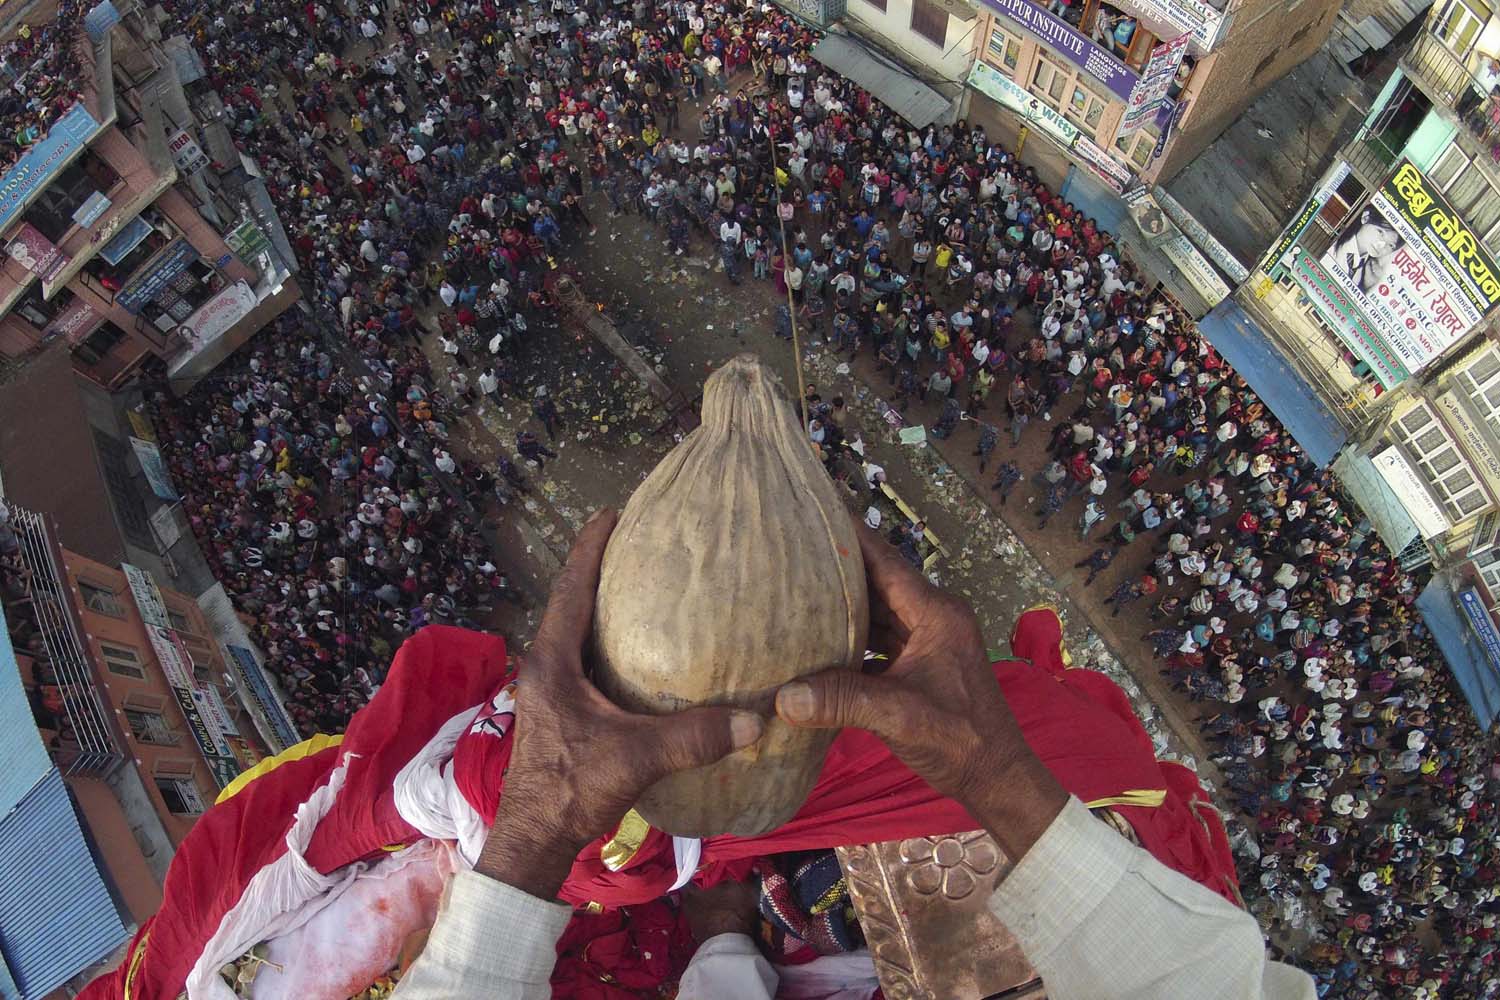 Chakala Dangol, 75, holds a coconut on his hand before throwing it towards the devotees from the top of the chariot of Rato during the chariot festival in Lalitpur